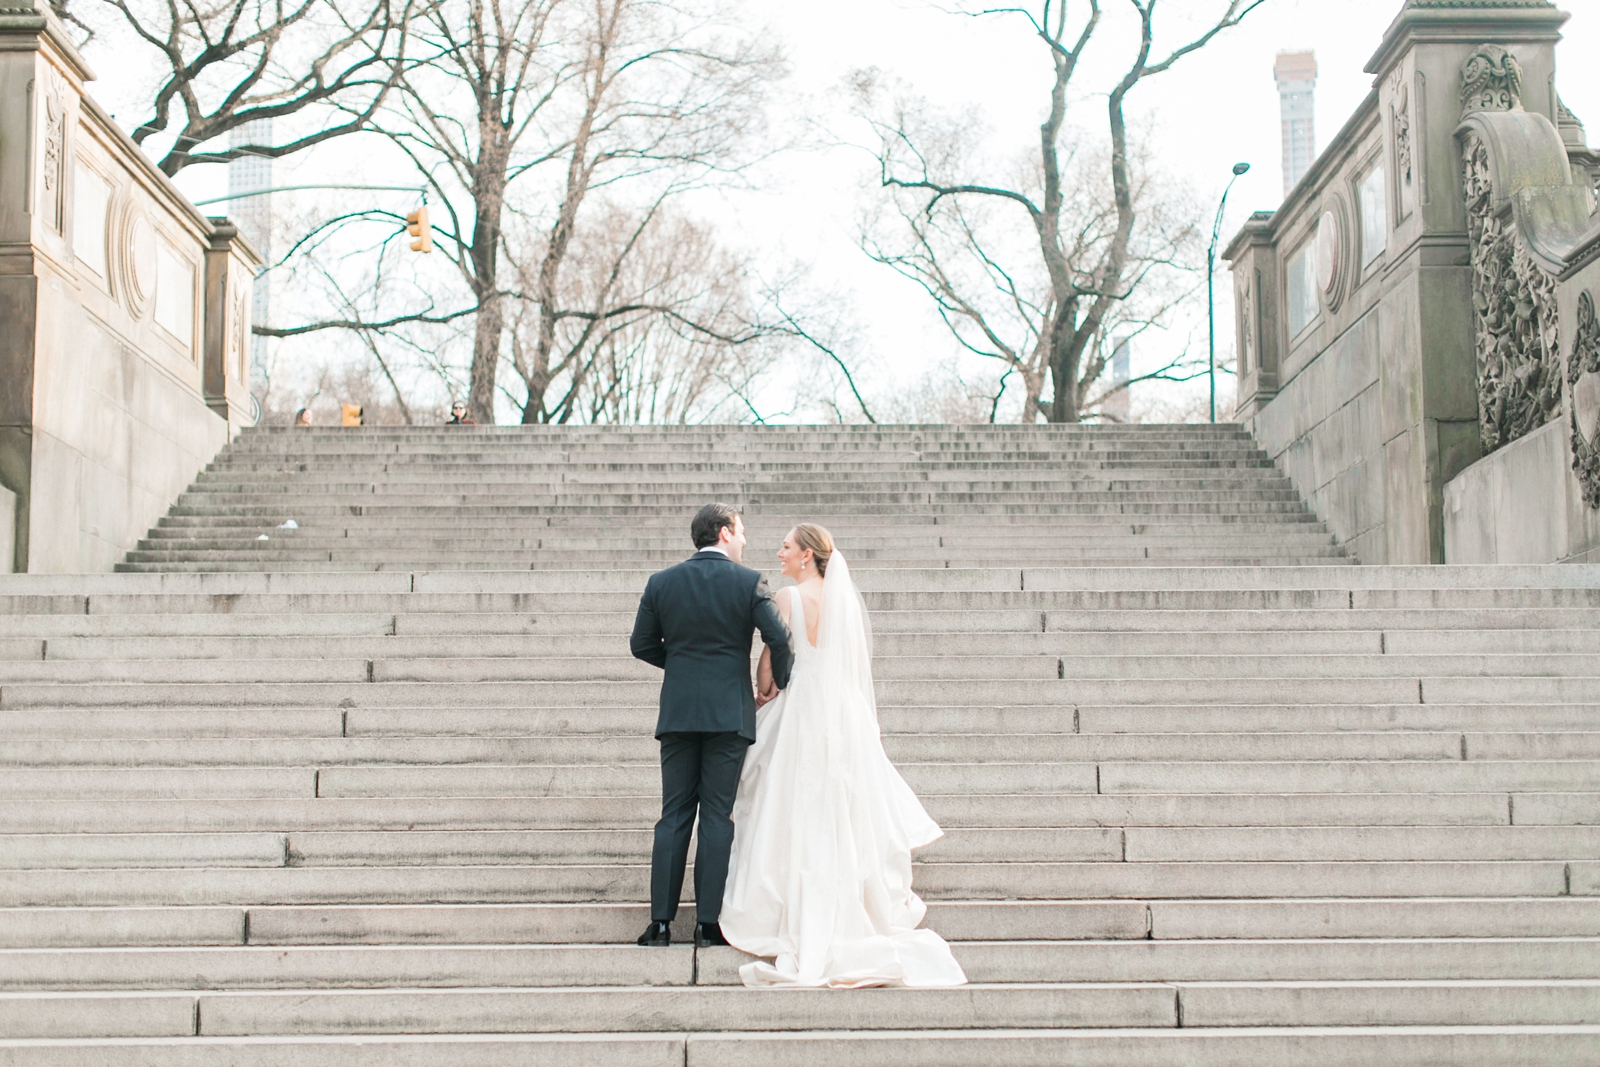 Central Park wedding photo in front of Bethesda Terrace stairs